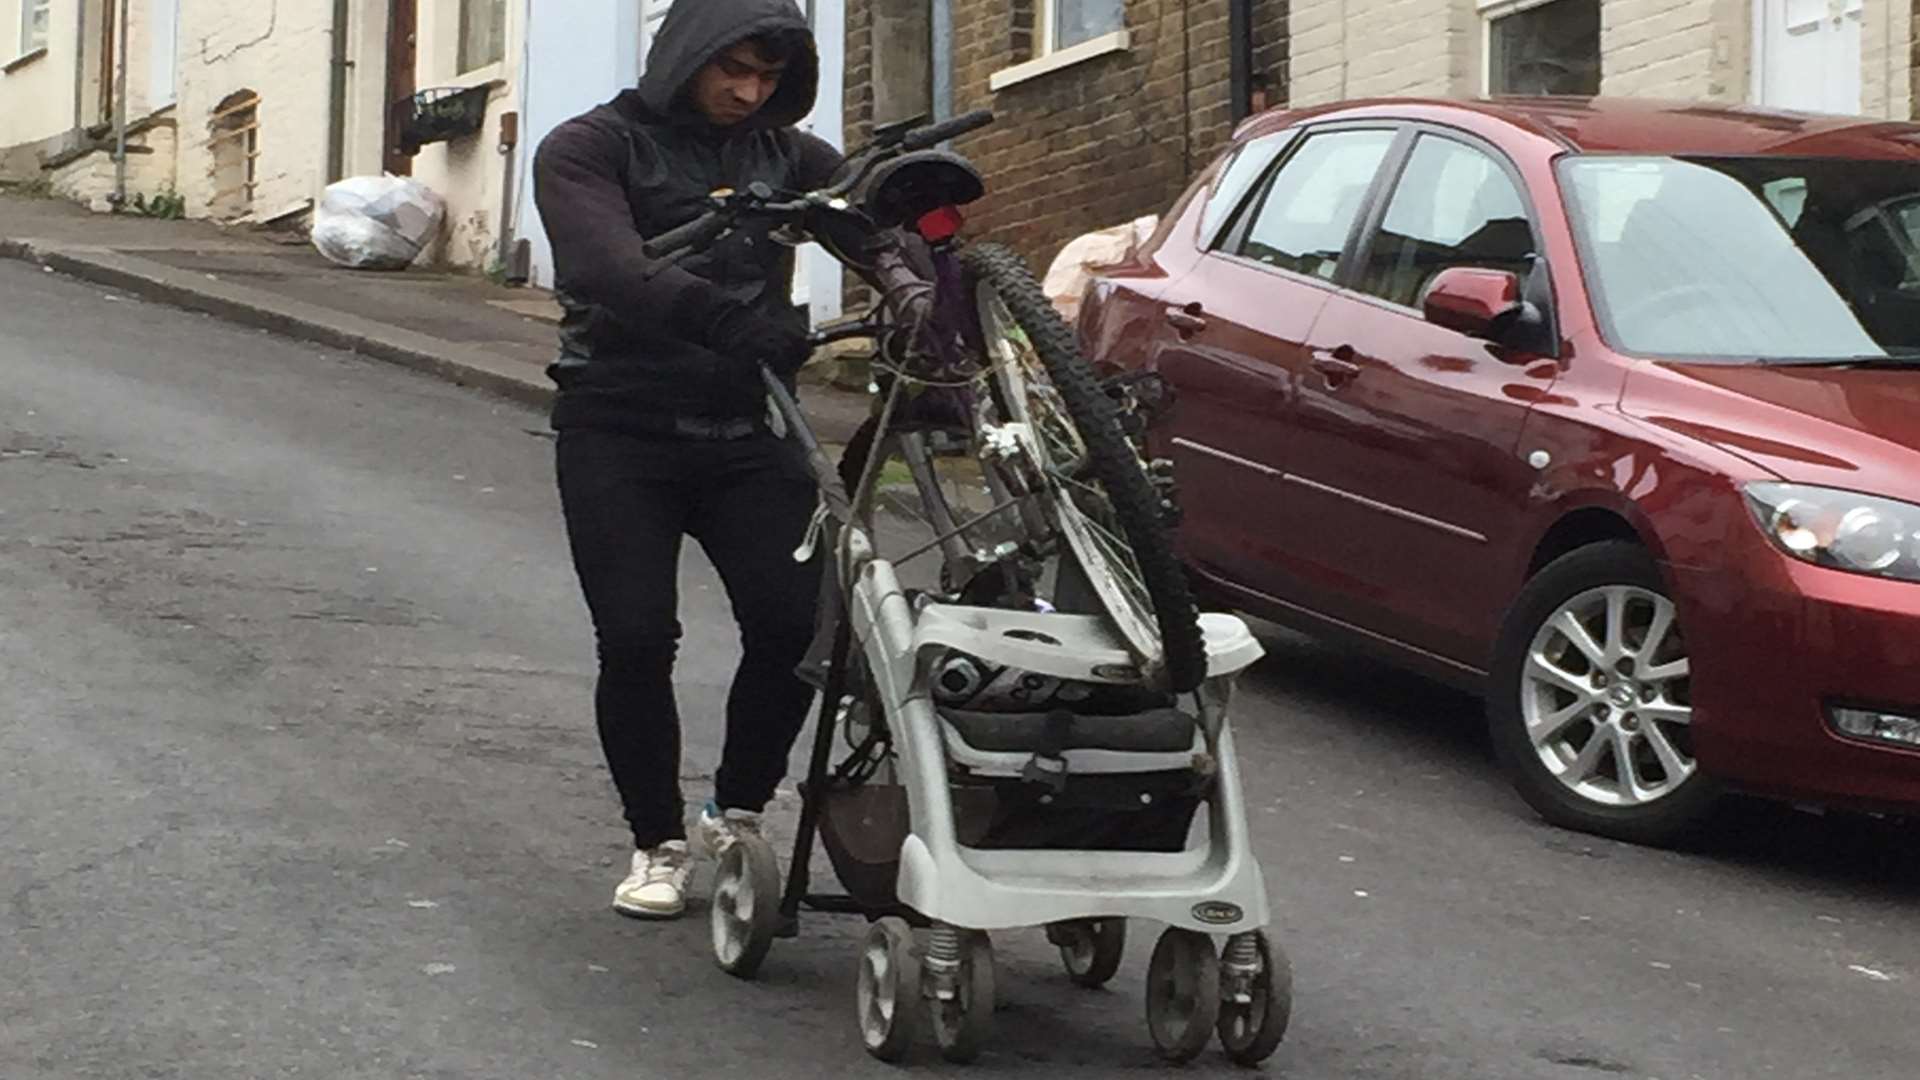 Residents took this photo of another man with a bike on a pushchair in Chatham at the start of April.